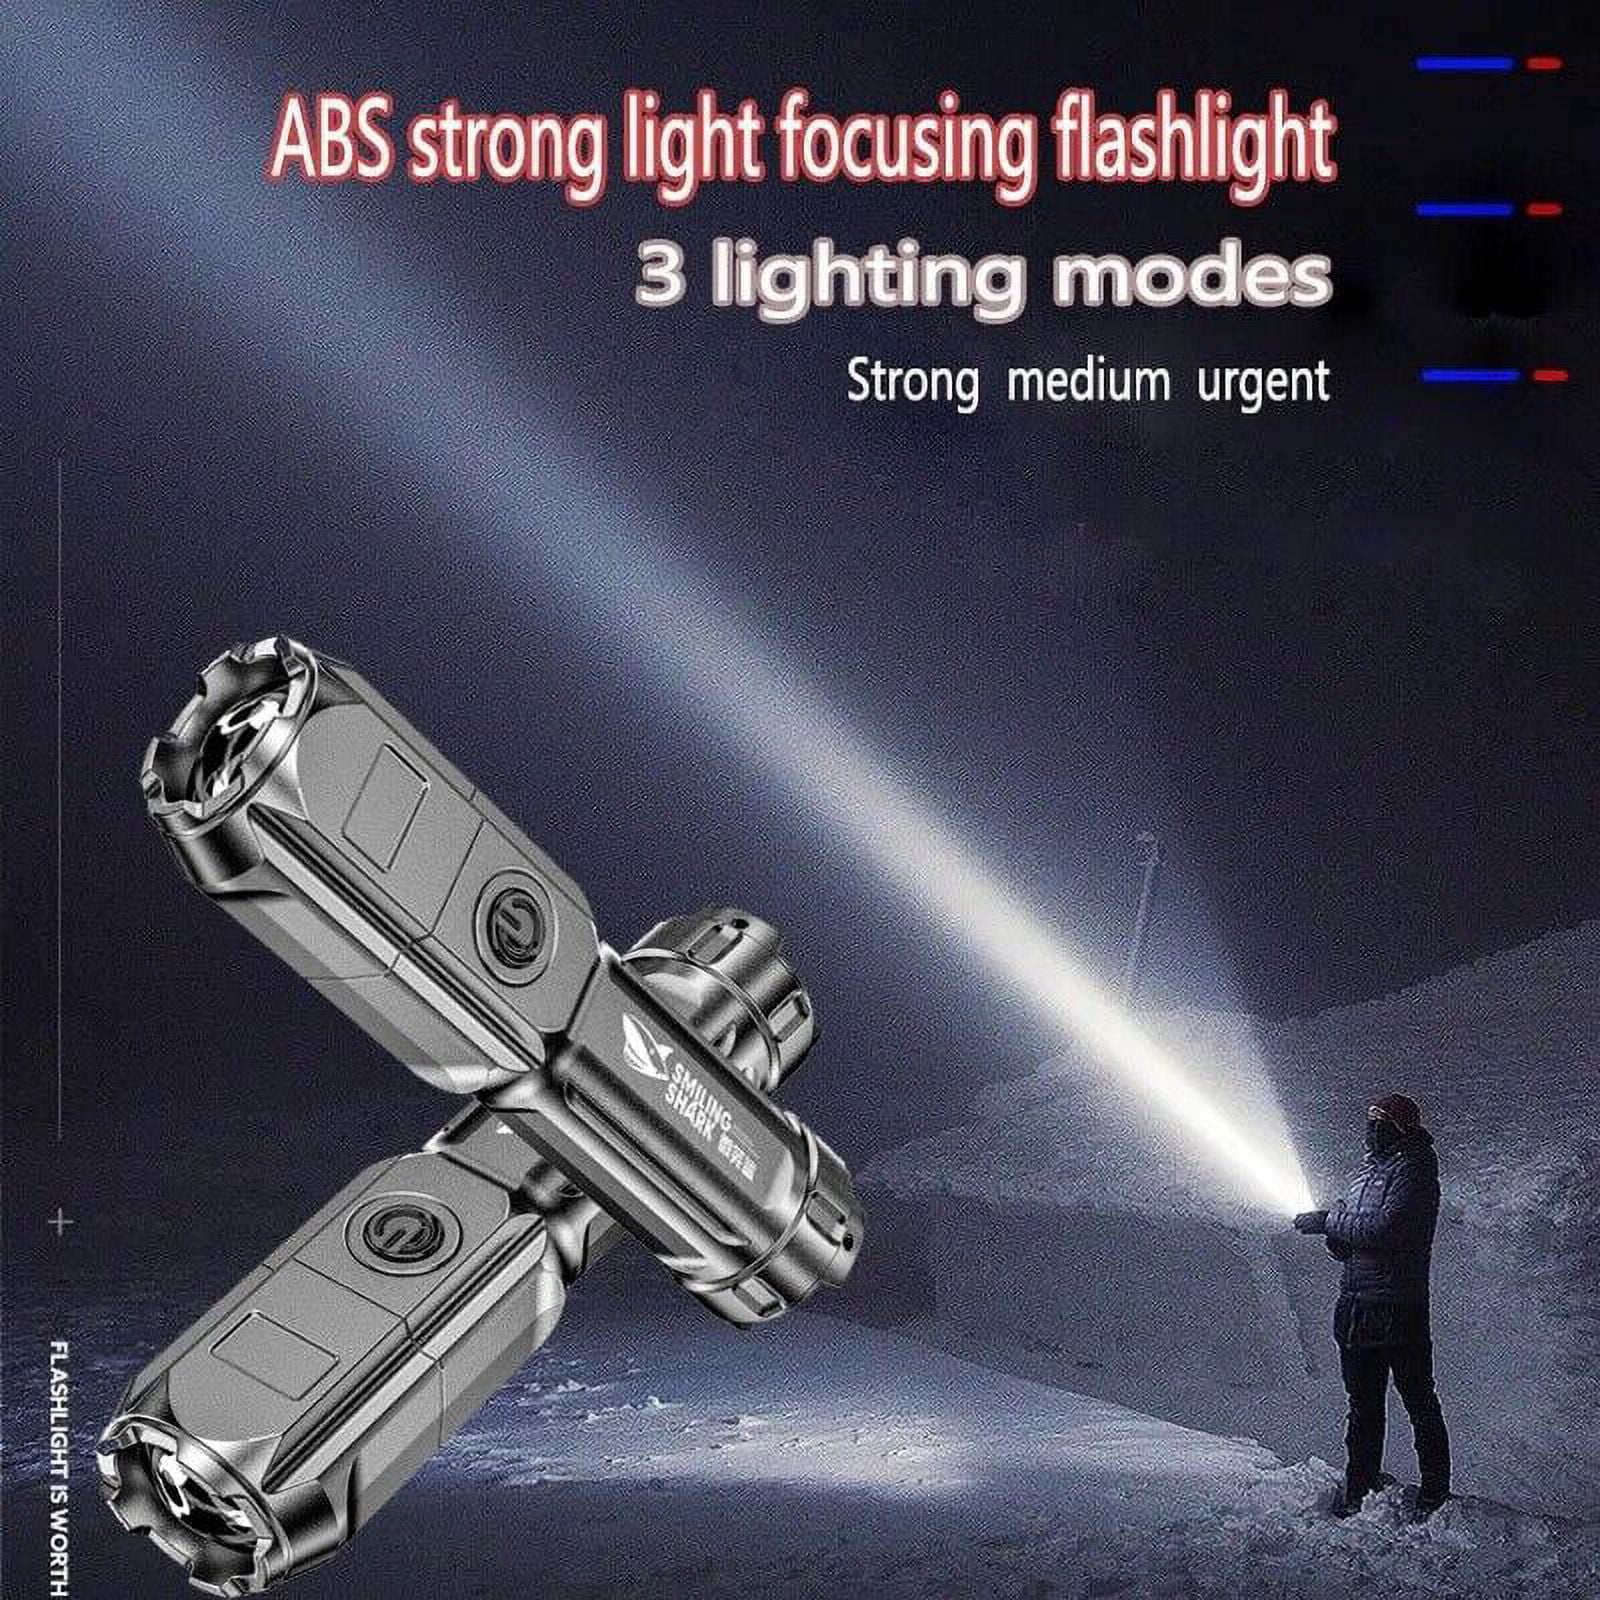 990000LM Rechargeable LED High Power Flashlight Torch Lights Lamp & Battery  Z